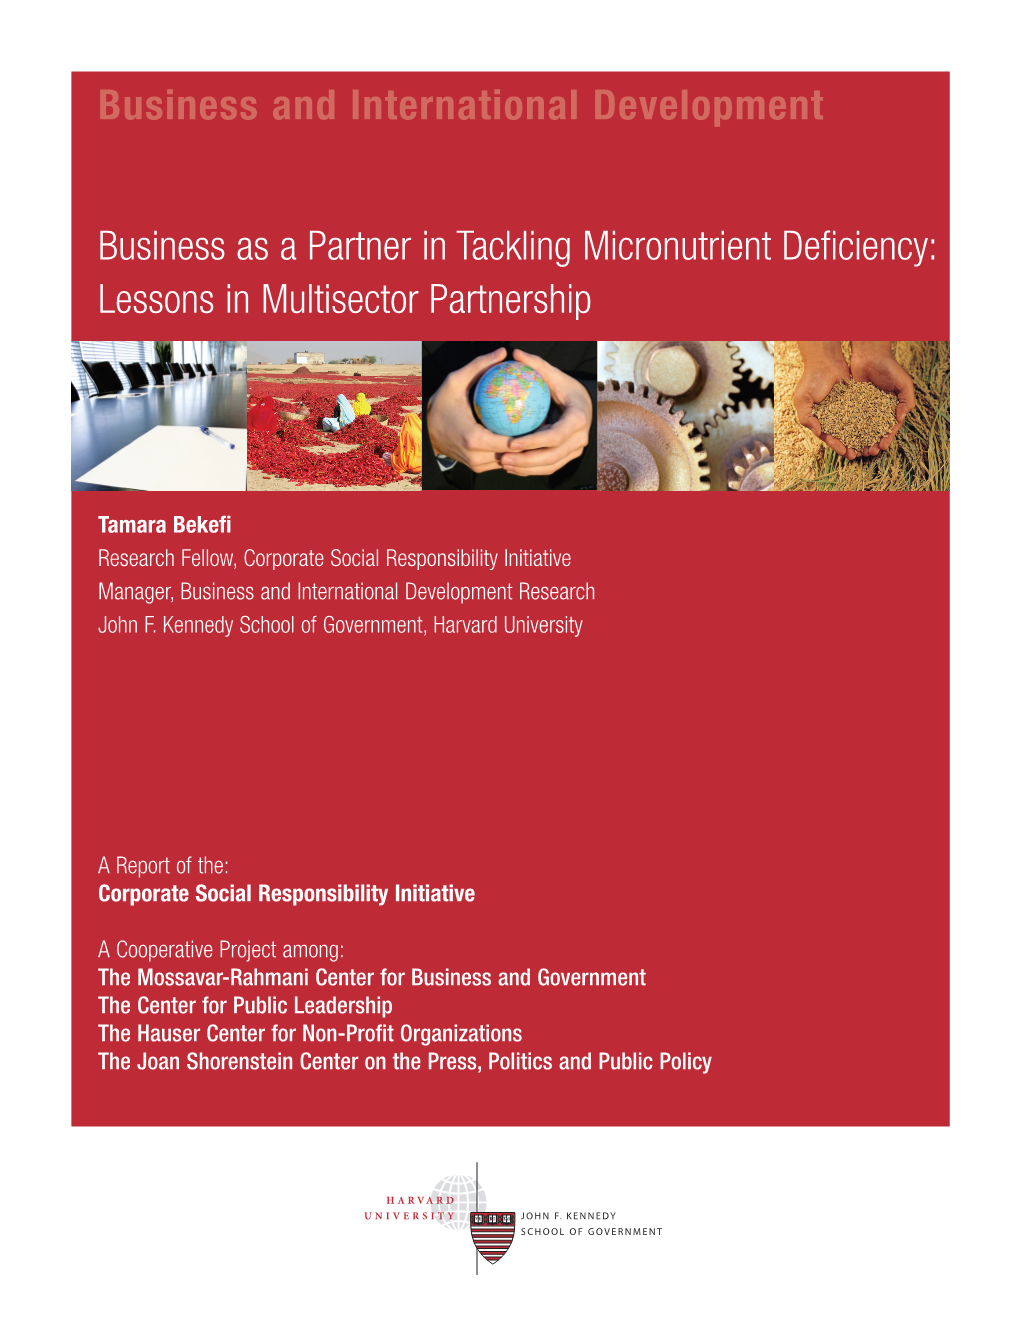 Business As a Partner in Tackling Micronutrient Deficiency: Lessons in Multisector Partnership